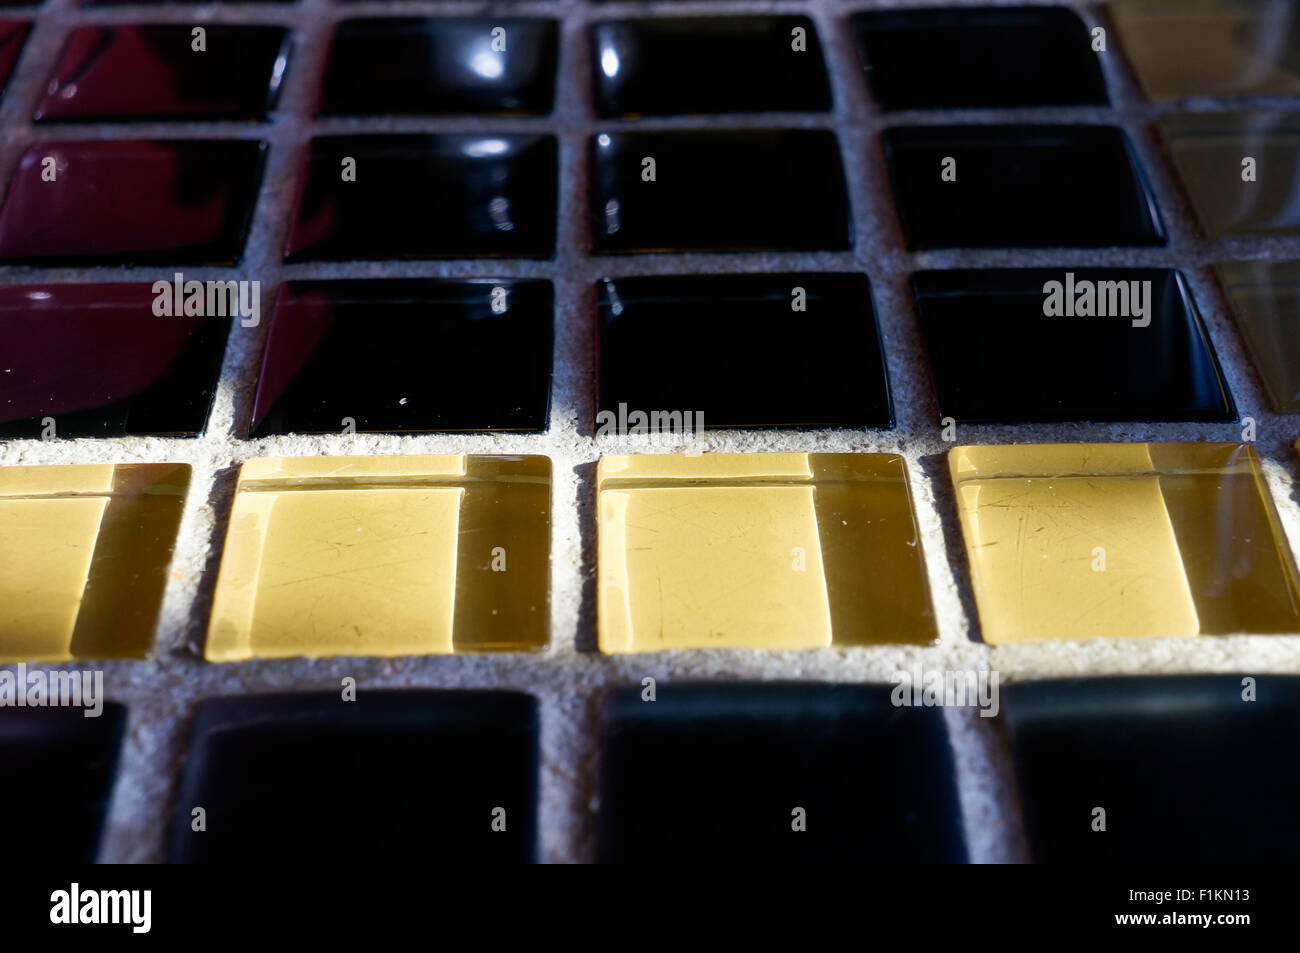 Grout and glass tiles Stock Photo